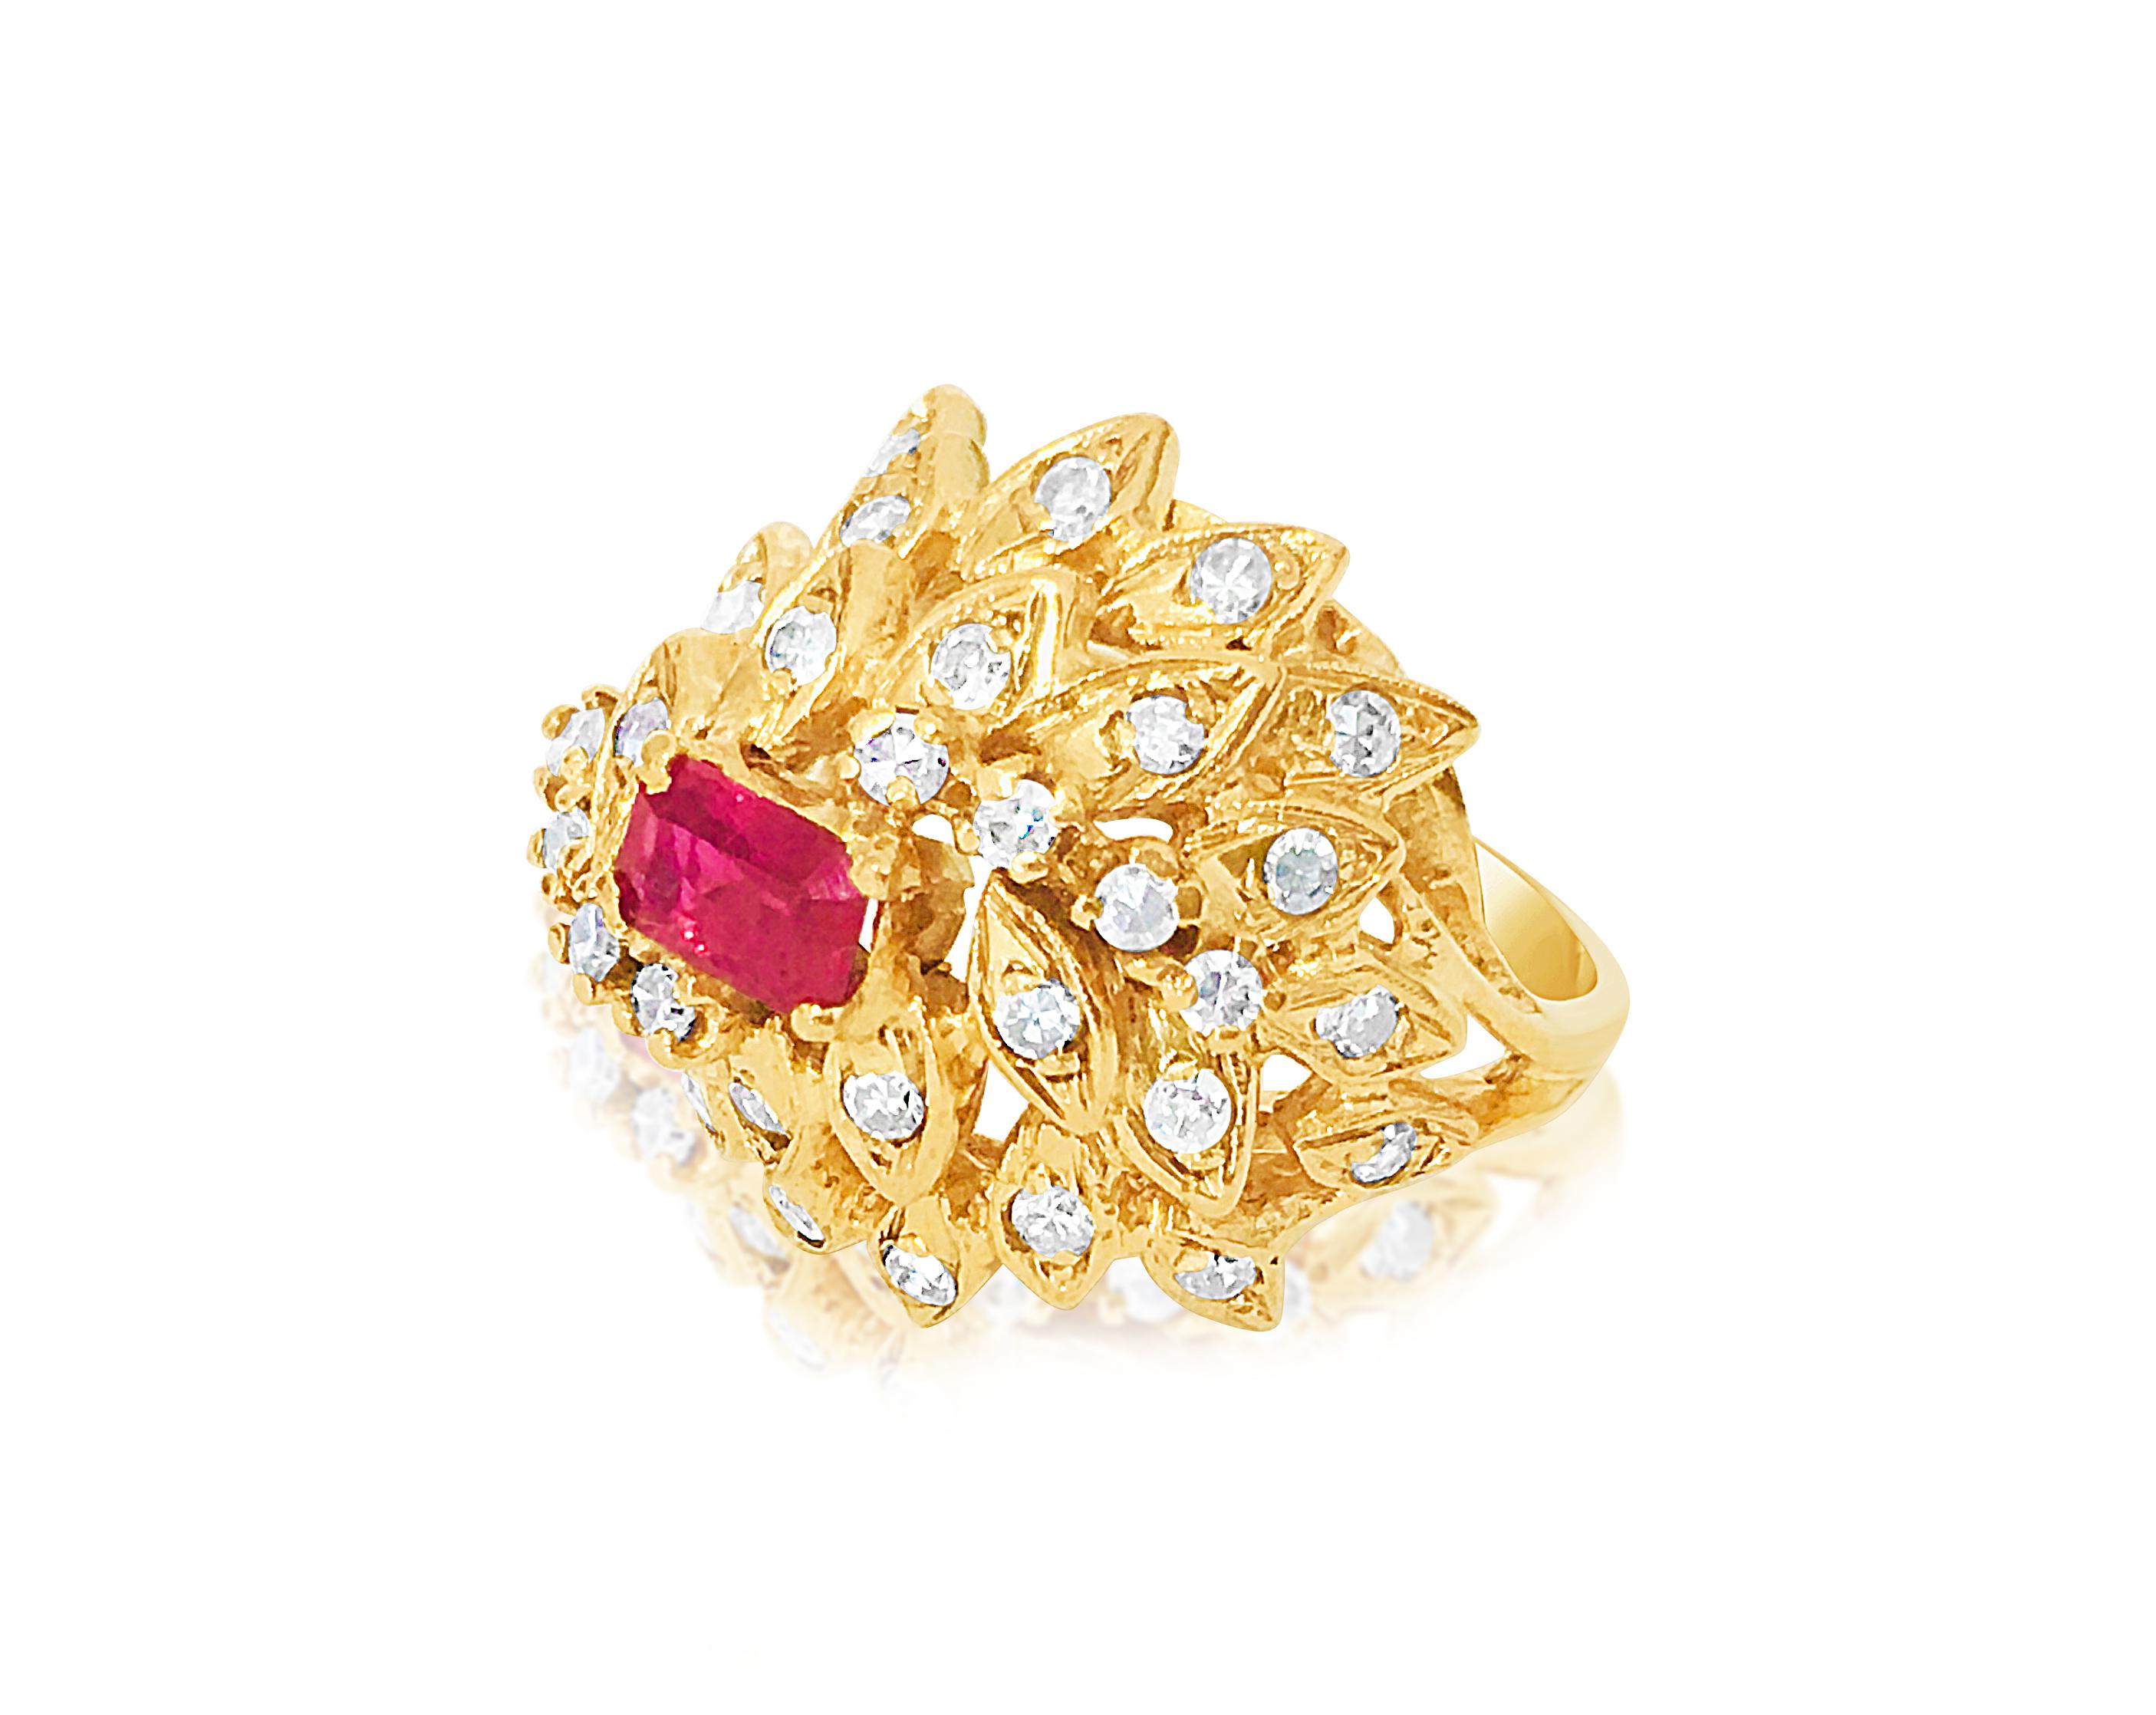 Fashioned from elegant 18K yellow gold, this ring showcases a stunning 1.00-carat natural ruby, cut into an emerald shape and securely nestled in prongs. Mined from the earth, the ruby boasts an intense crimson hue, adding a touch of vintage allure